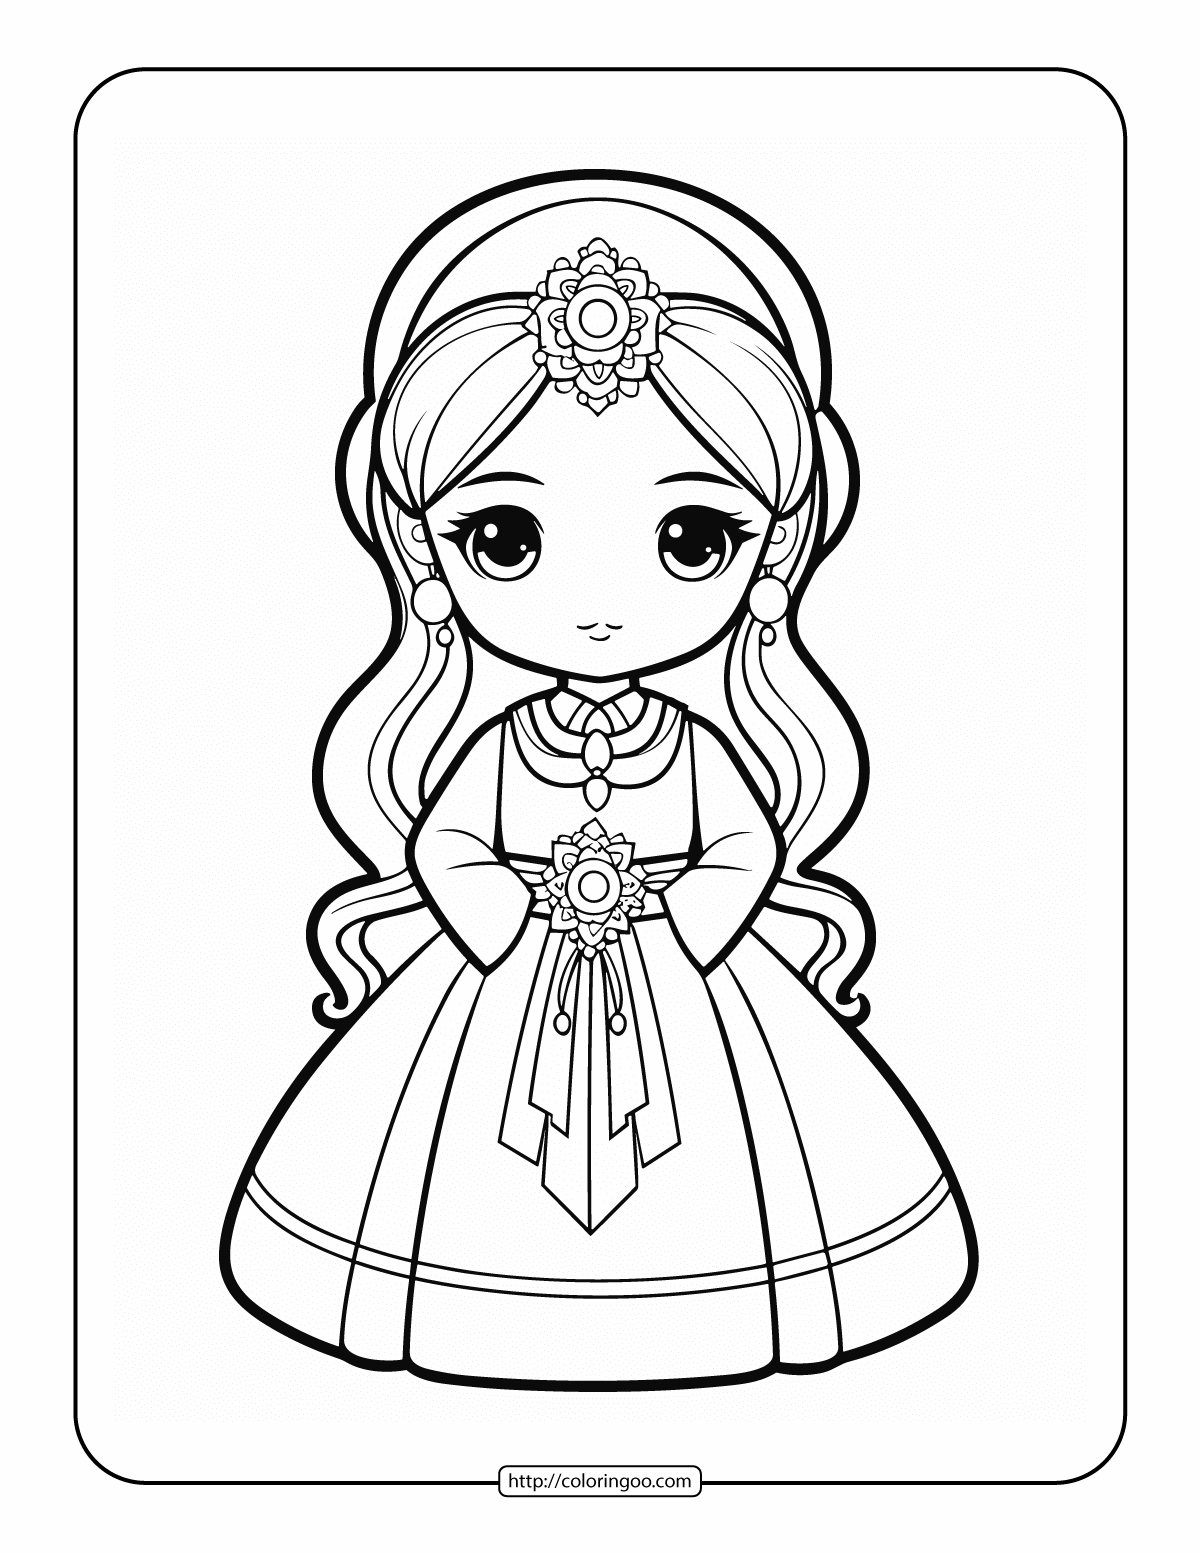 princess coloring pages for girls 02